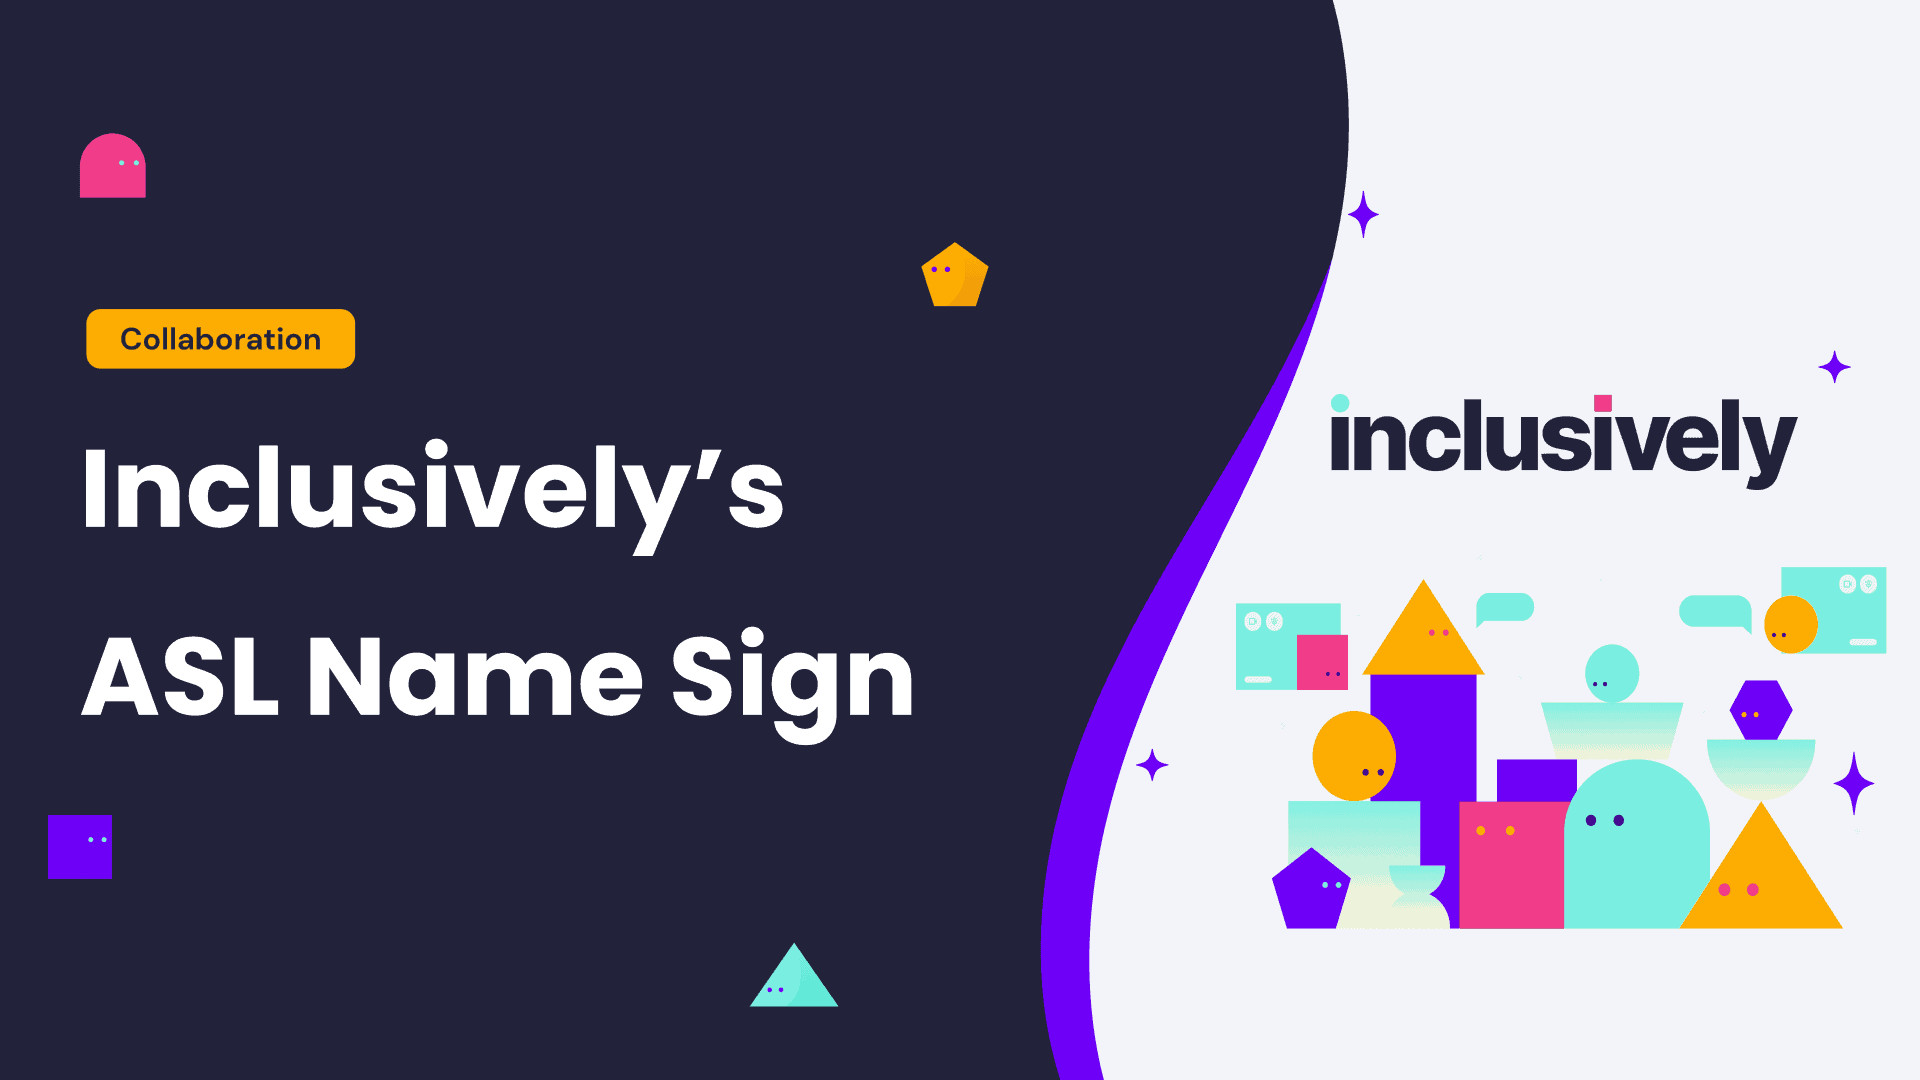 Inclusively's ASL Name and Sign